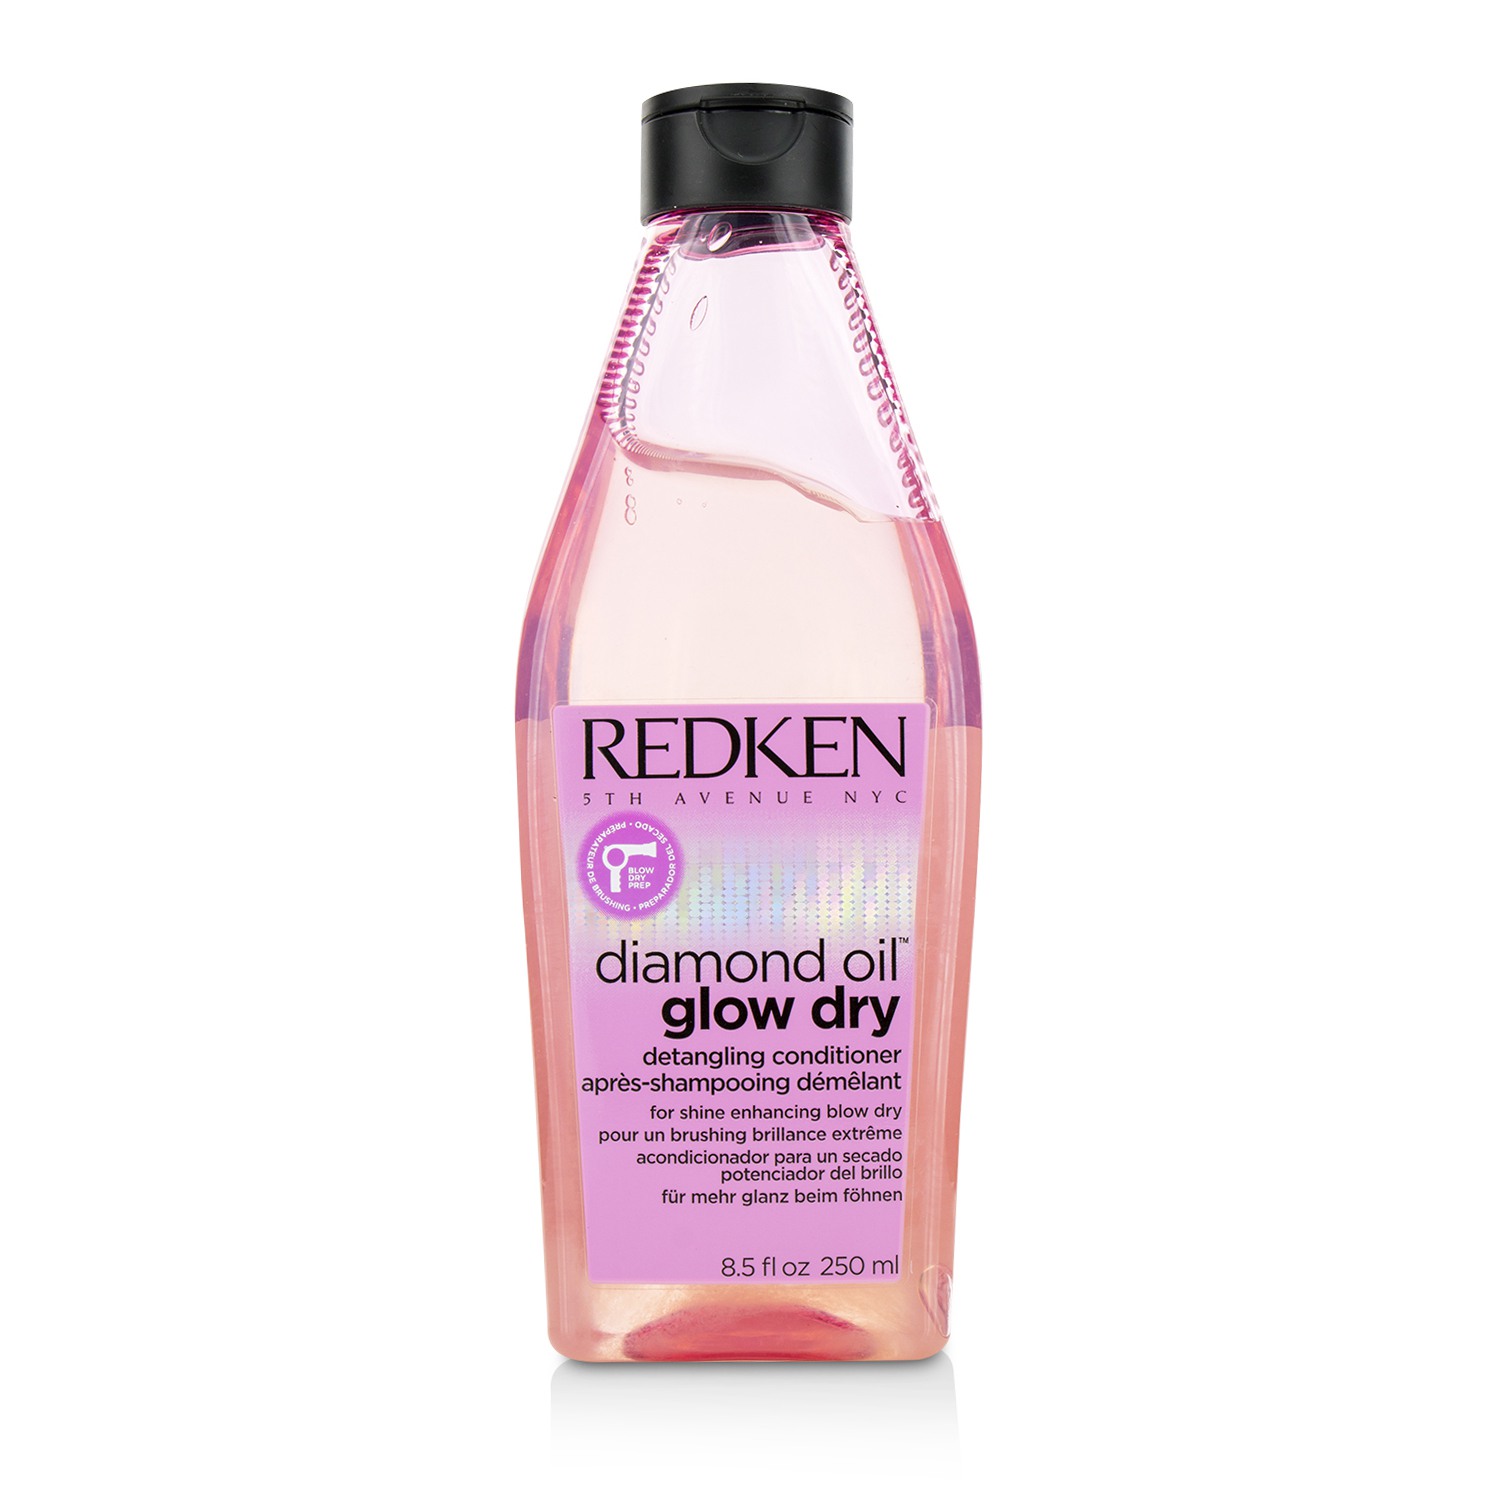 Diamond Oil Glow Dry Detangling Conditioner (For Shine Enhancing Blow Dry) Redken Image